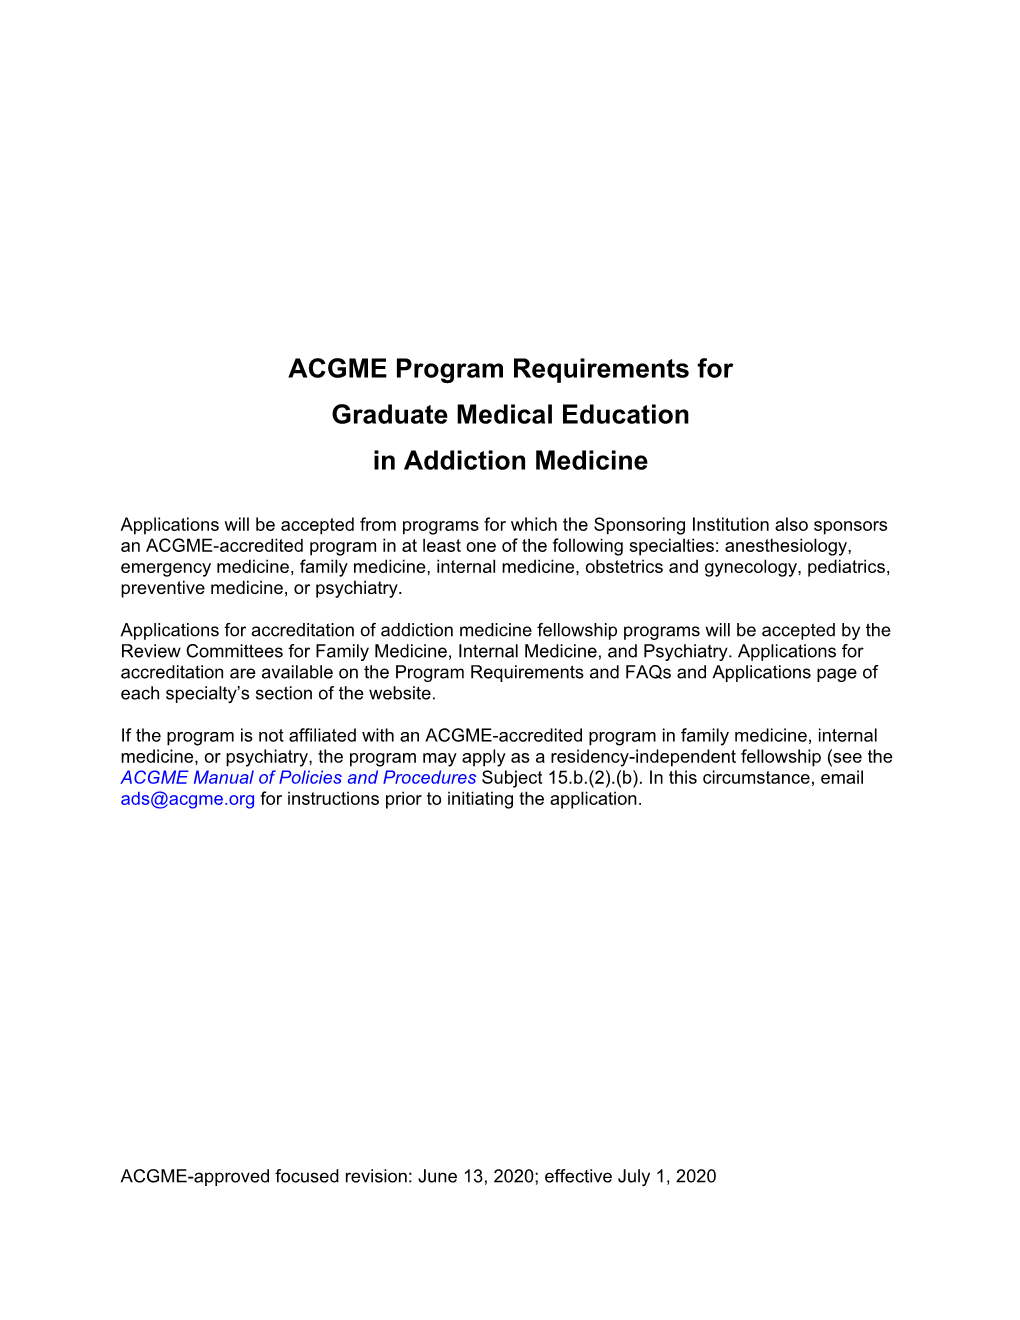 ACGME Program Requirements for Graduate Medical Education in Addiction Medicine